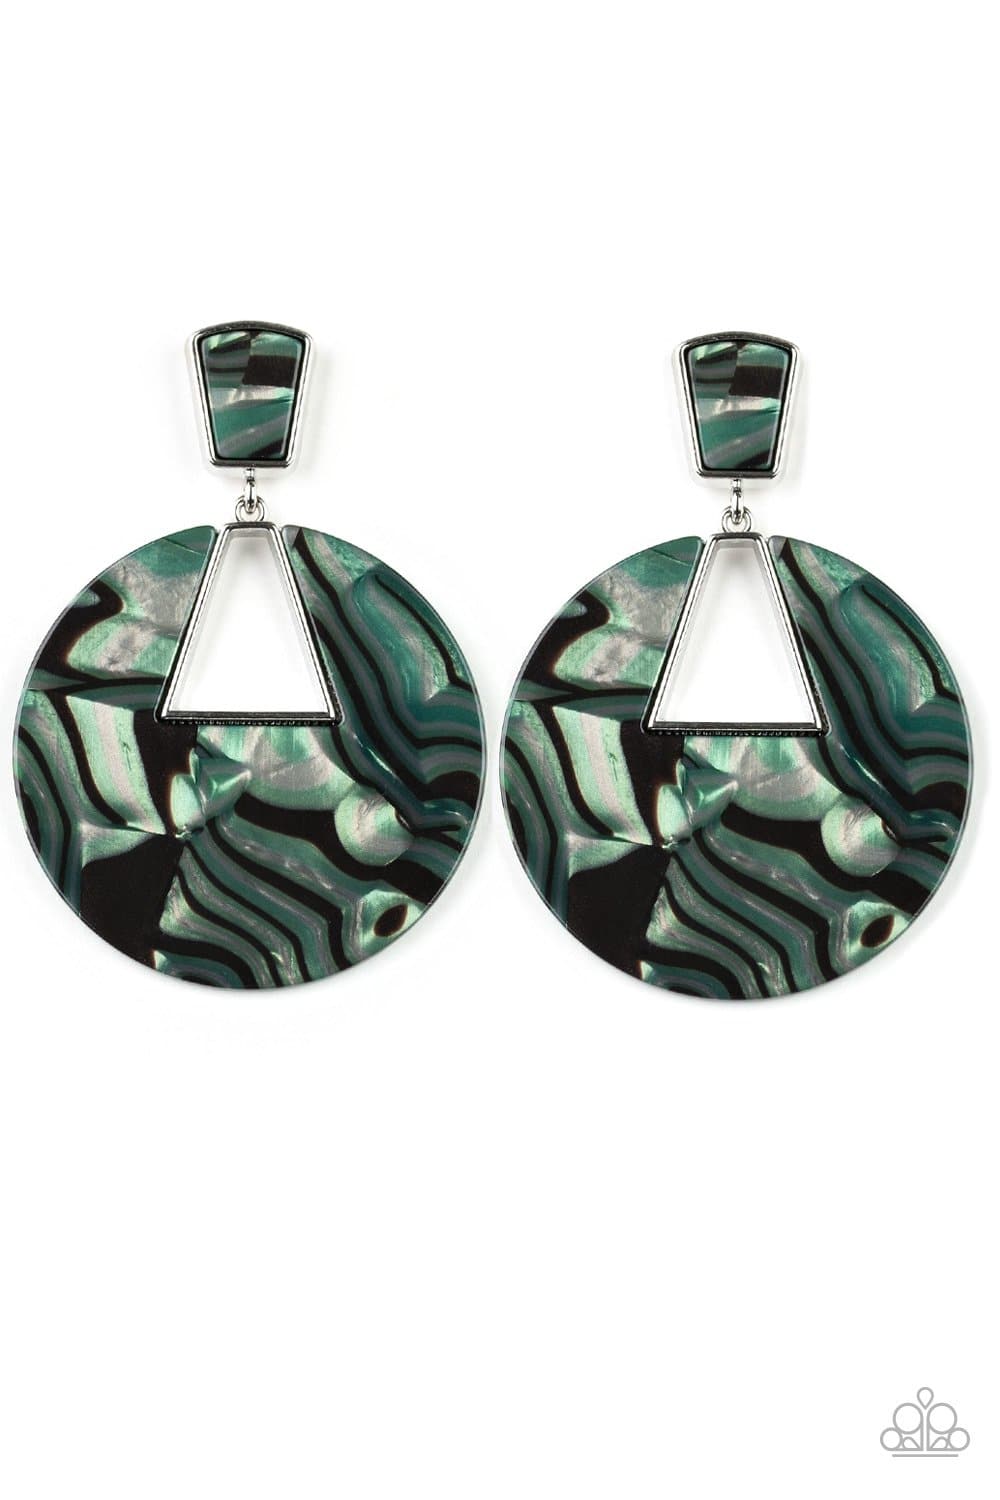 Let HEIR Rip! - Green Acrylic Post Earrings - Paparazzi Accessories - GlaMarous Titi Jewels